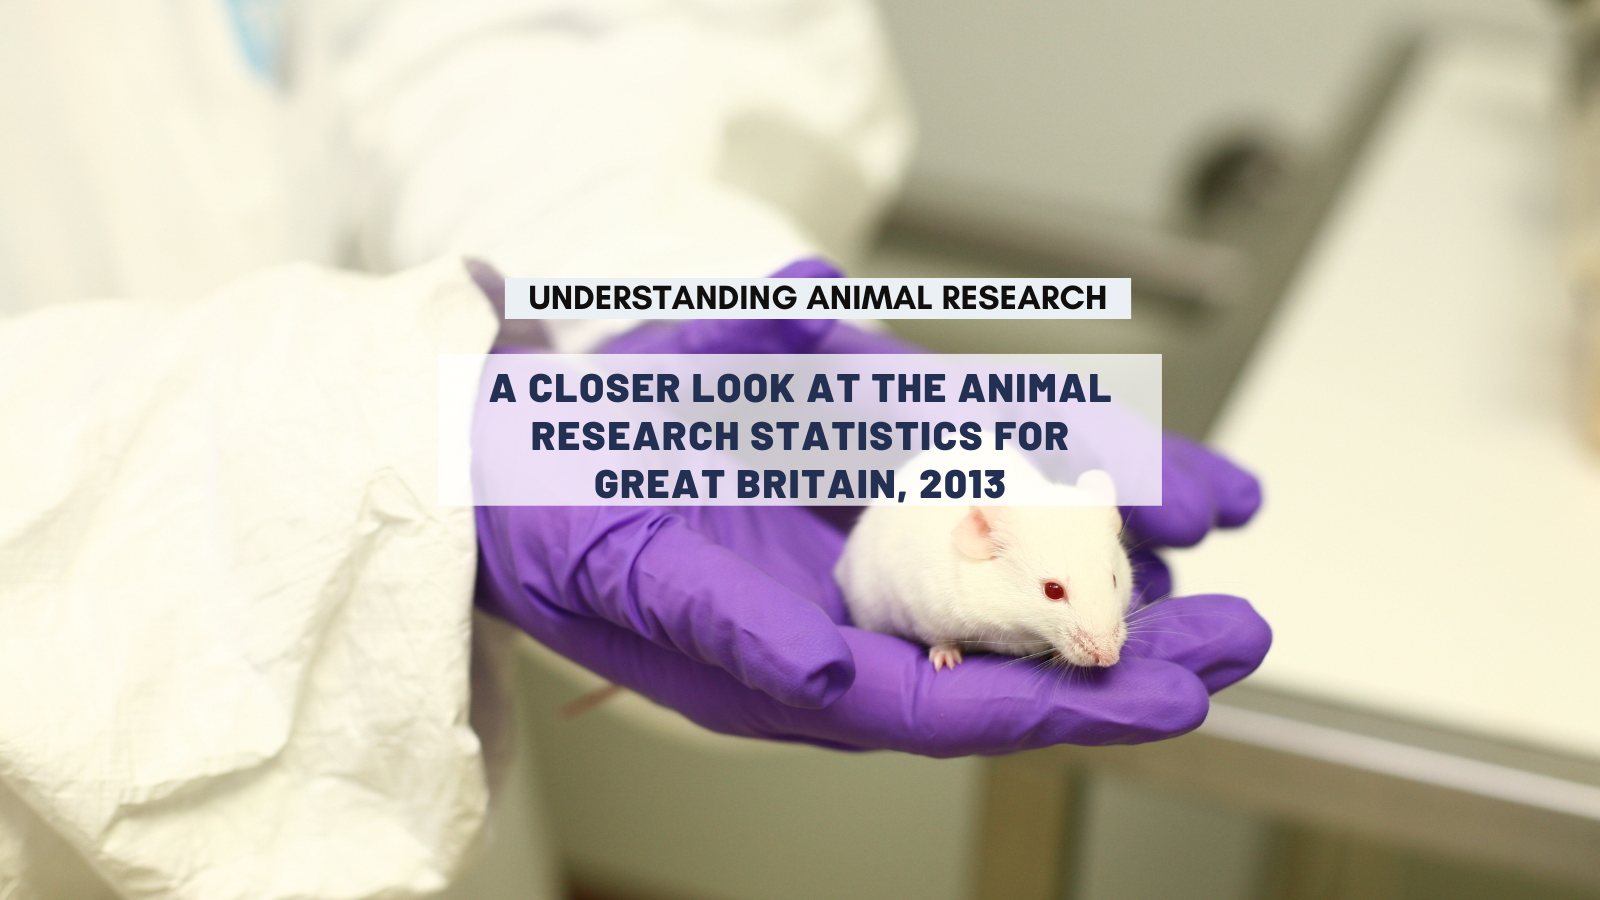 A closer look at the animal research statistics for Great Britain, 2013